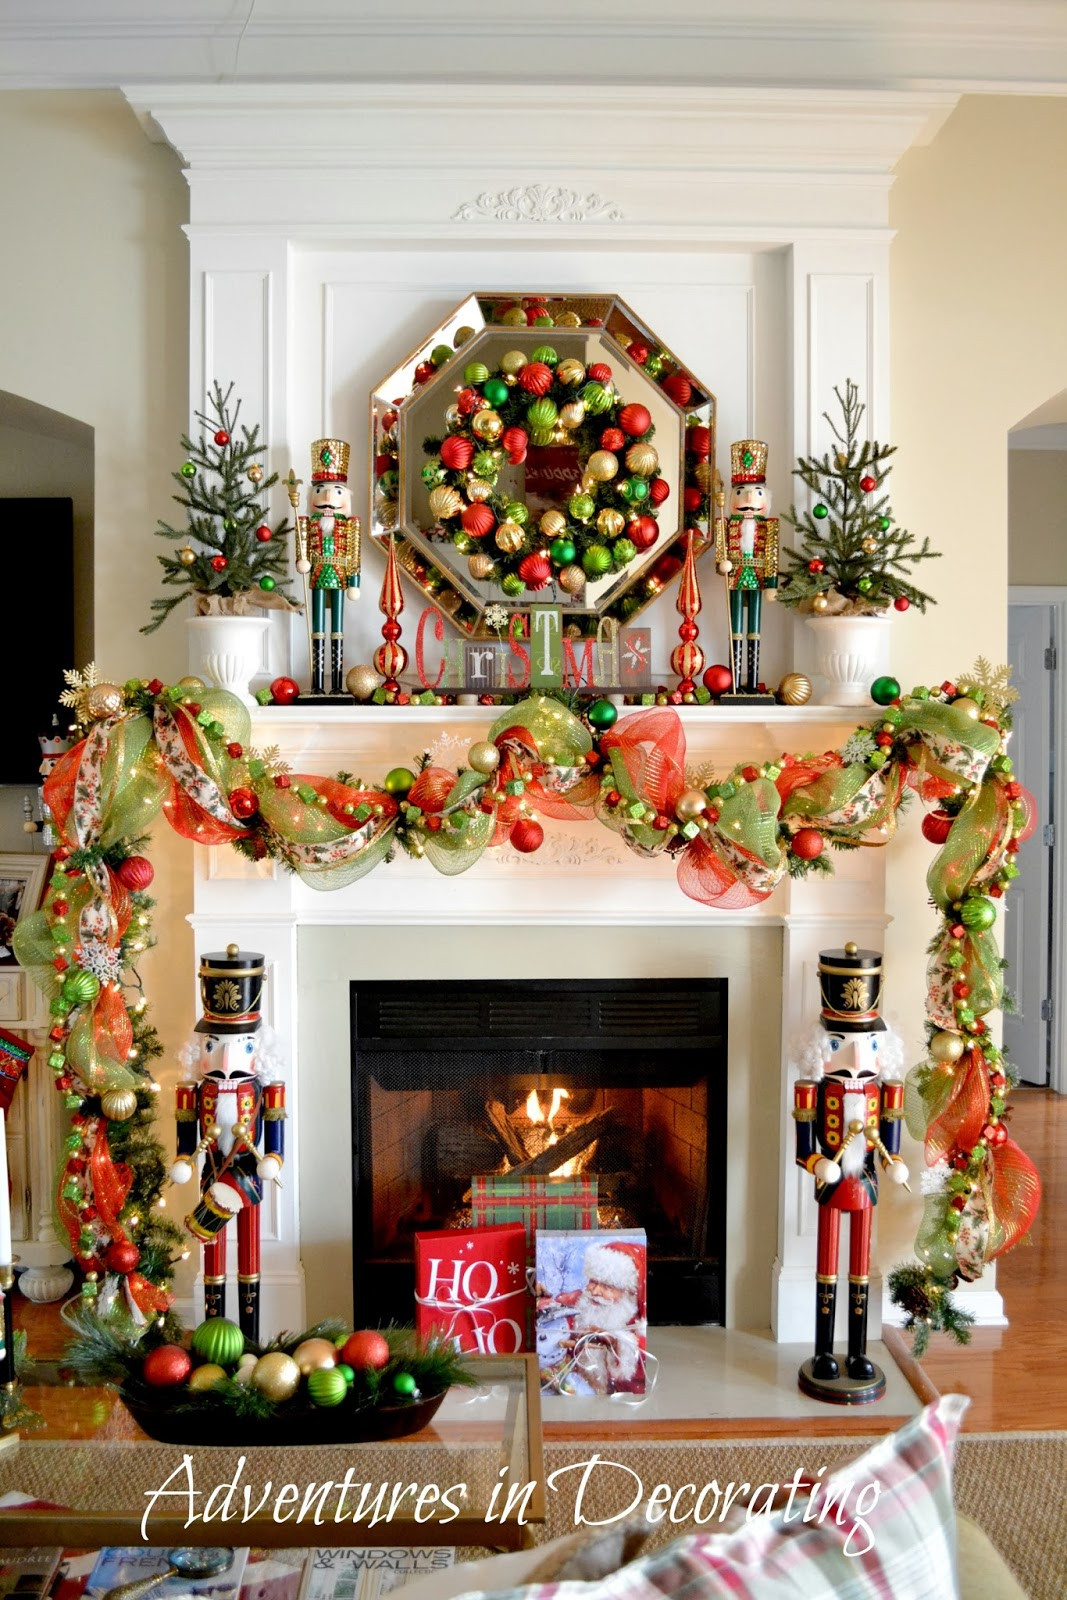 Christmas Fireplace Mantle Ideas
 Adventures in Decorating Our Christmas Mantel and "Deck